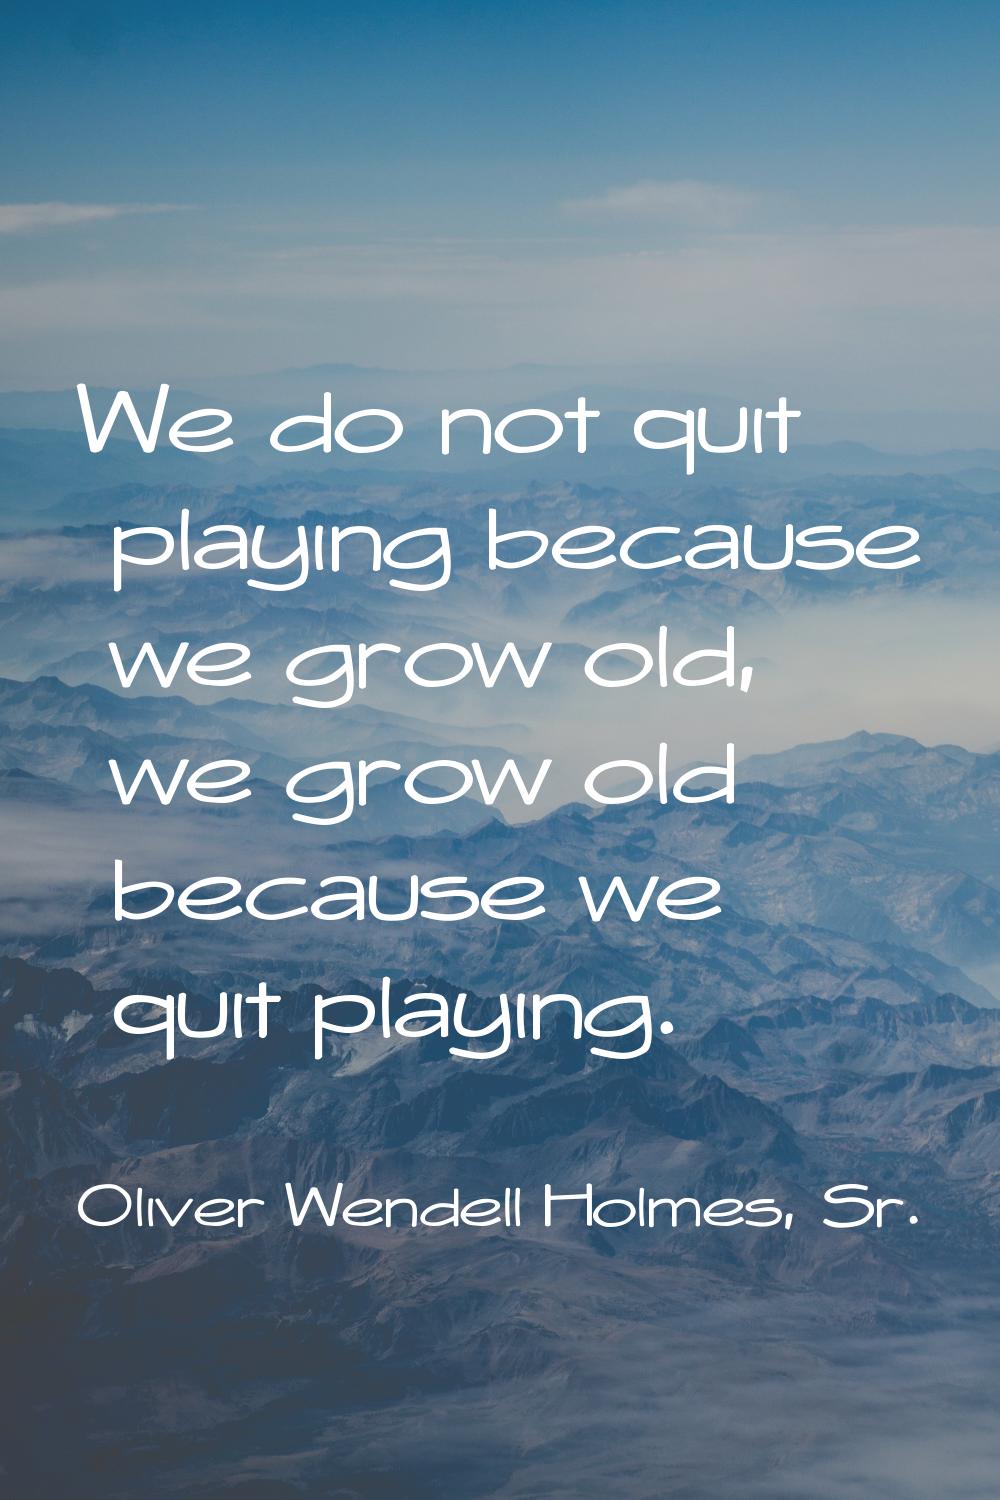 We do not quit playing because we grow old, we grow old because we quit playing.